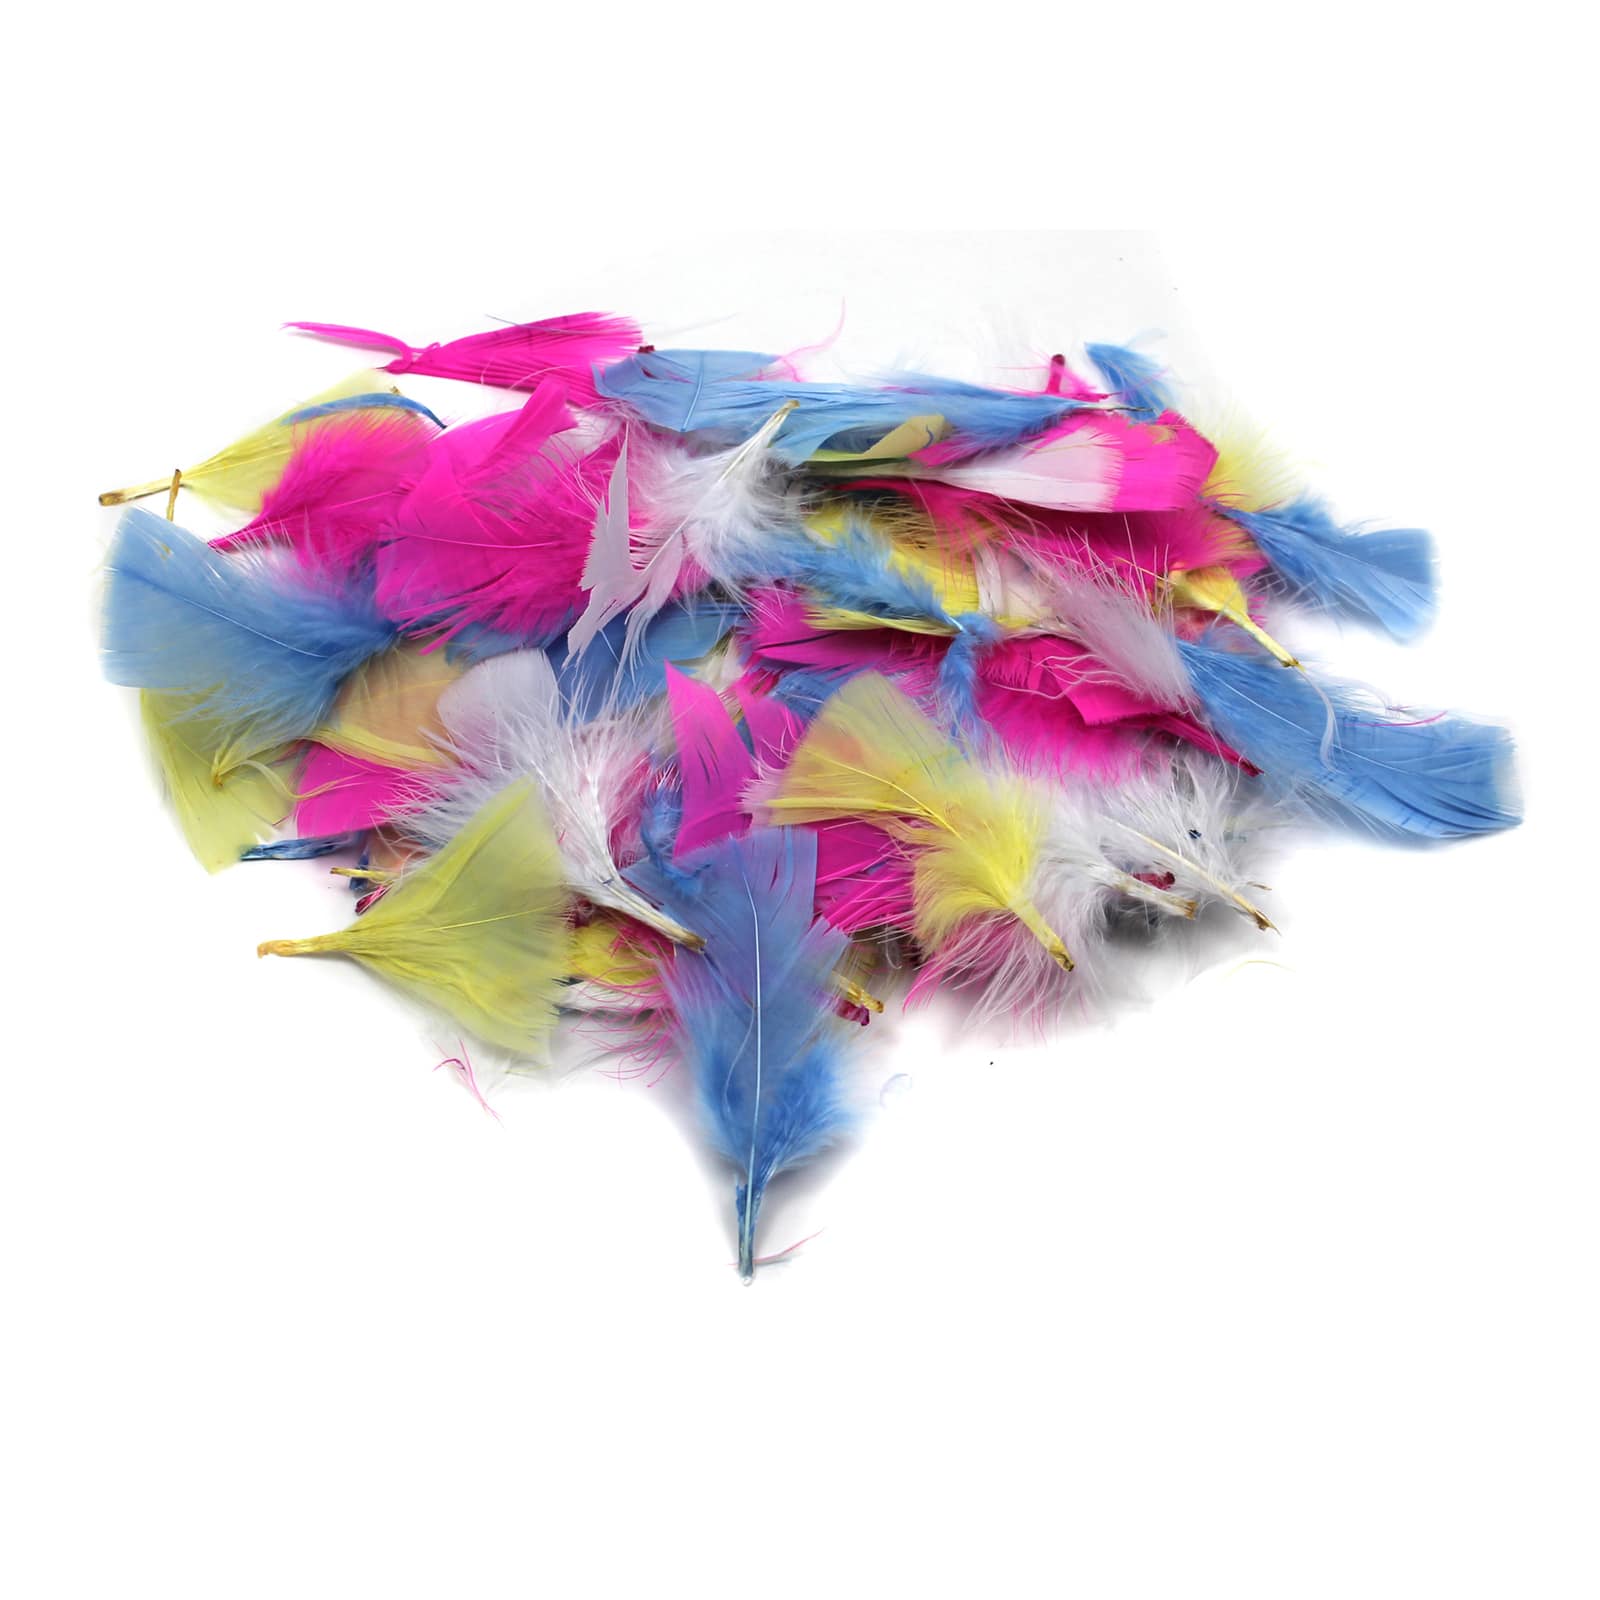 Bag of Turkey Feathers with Spring Colors, 12ct.